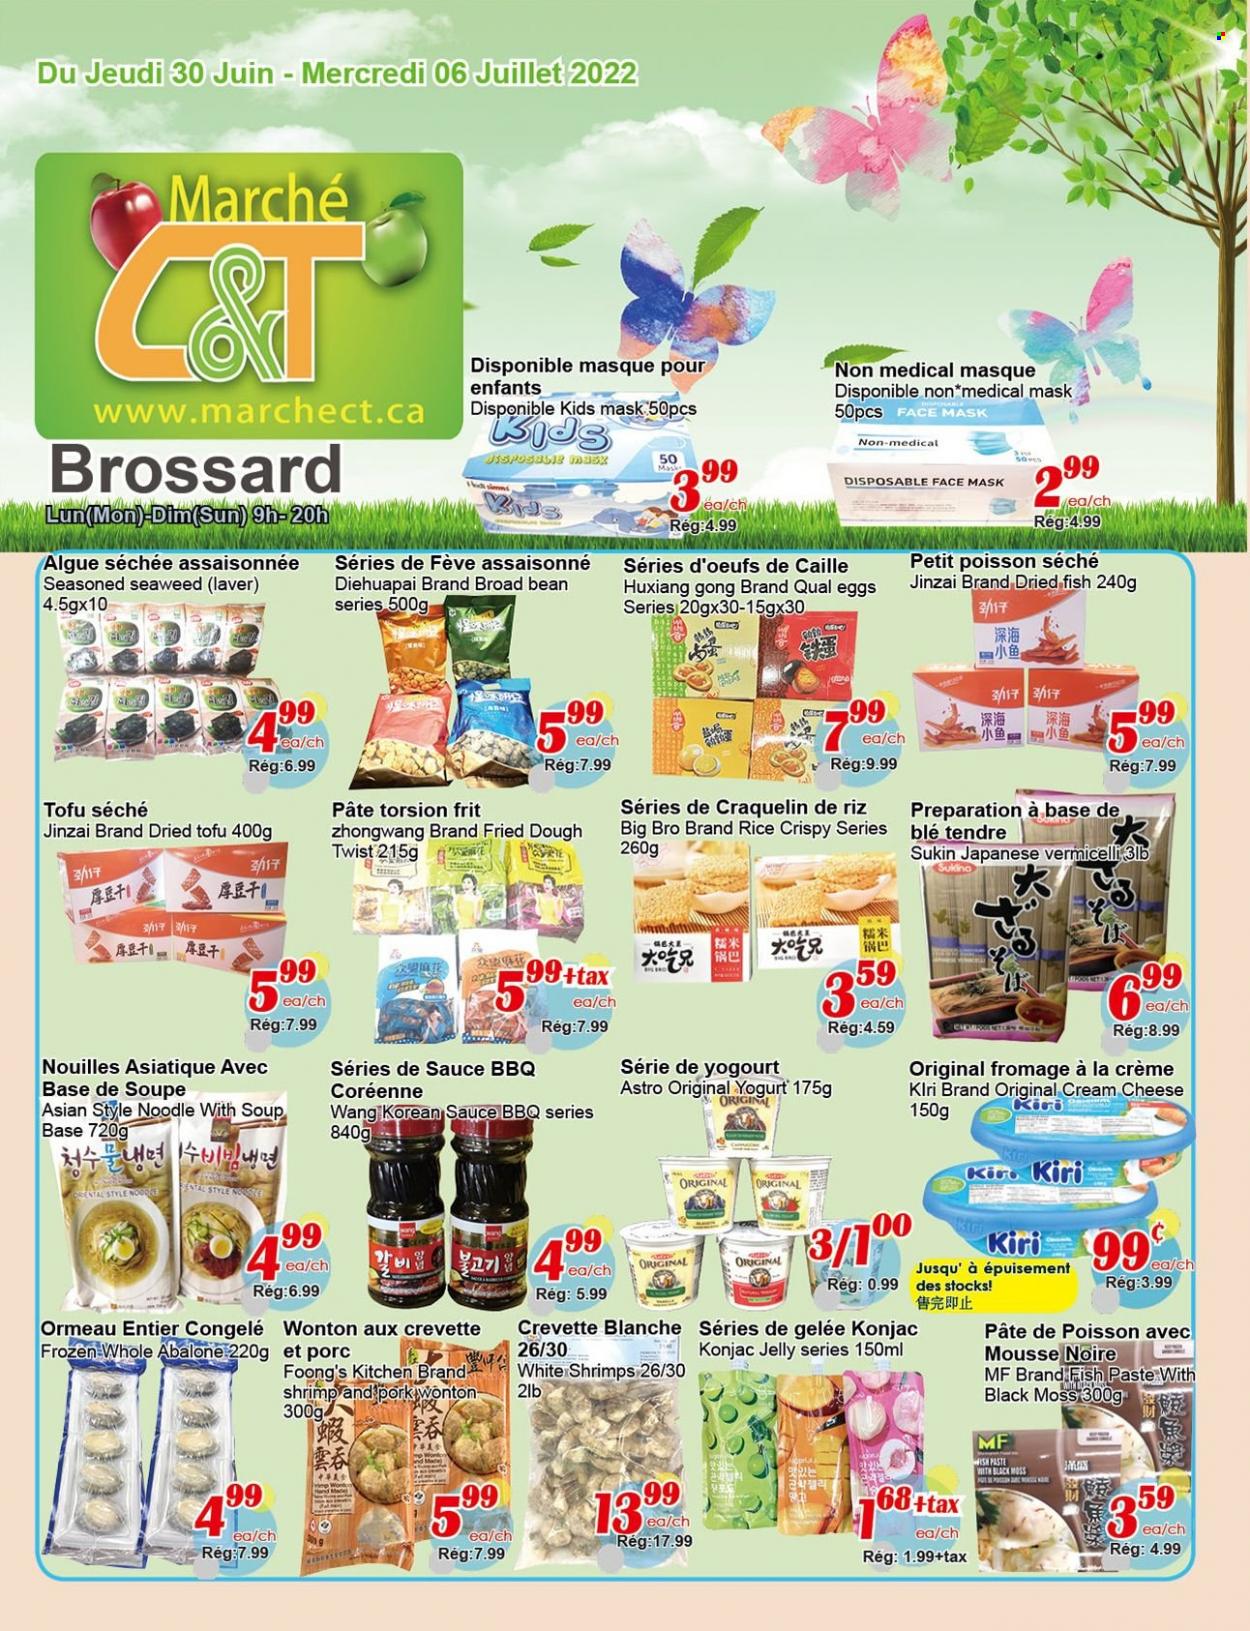 thumbnail - Marché C&T Flyer - June 30, 2022 - July 06, 2022 - Sales products - peas, fish, shrimps, abalone, soup, sauce, noodles, cream cheese, cheese, Kiri, tofu, yoghurt, eggs, jelly, seaweed. Page 1.